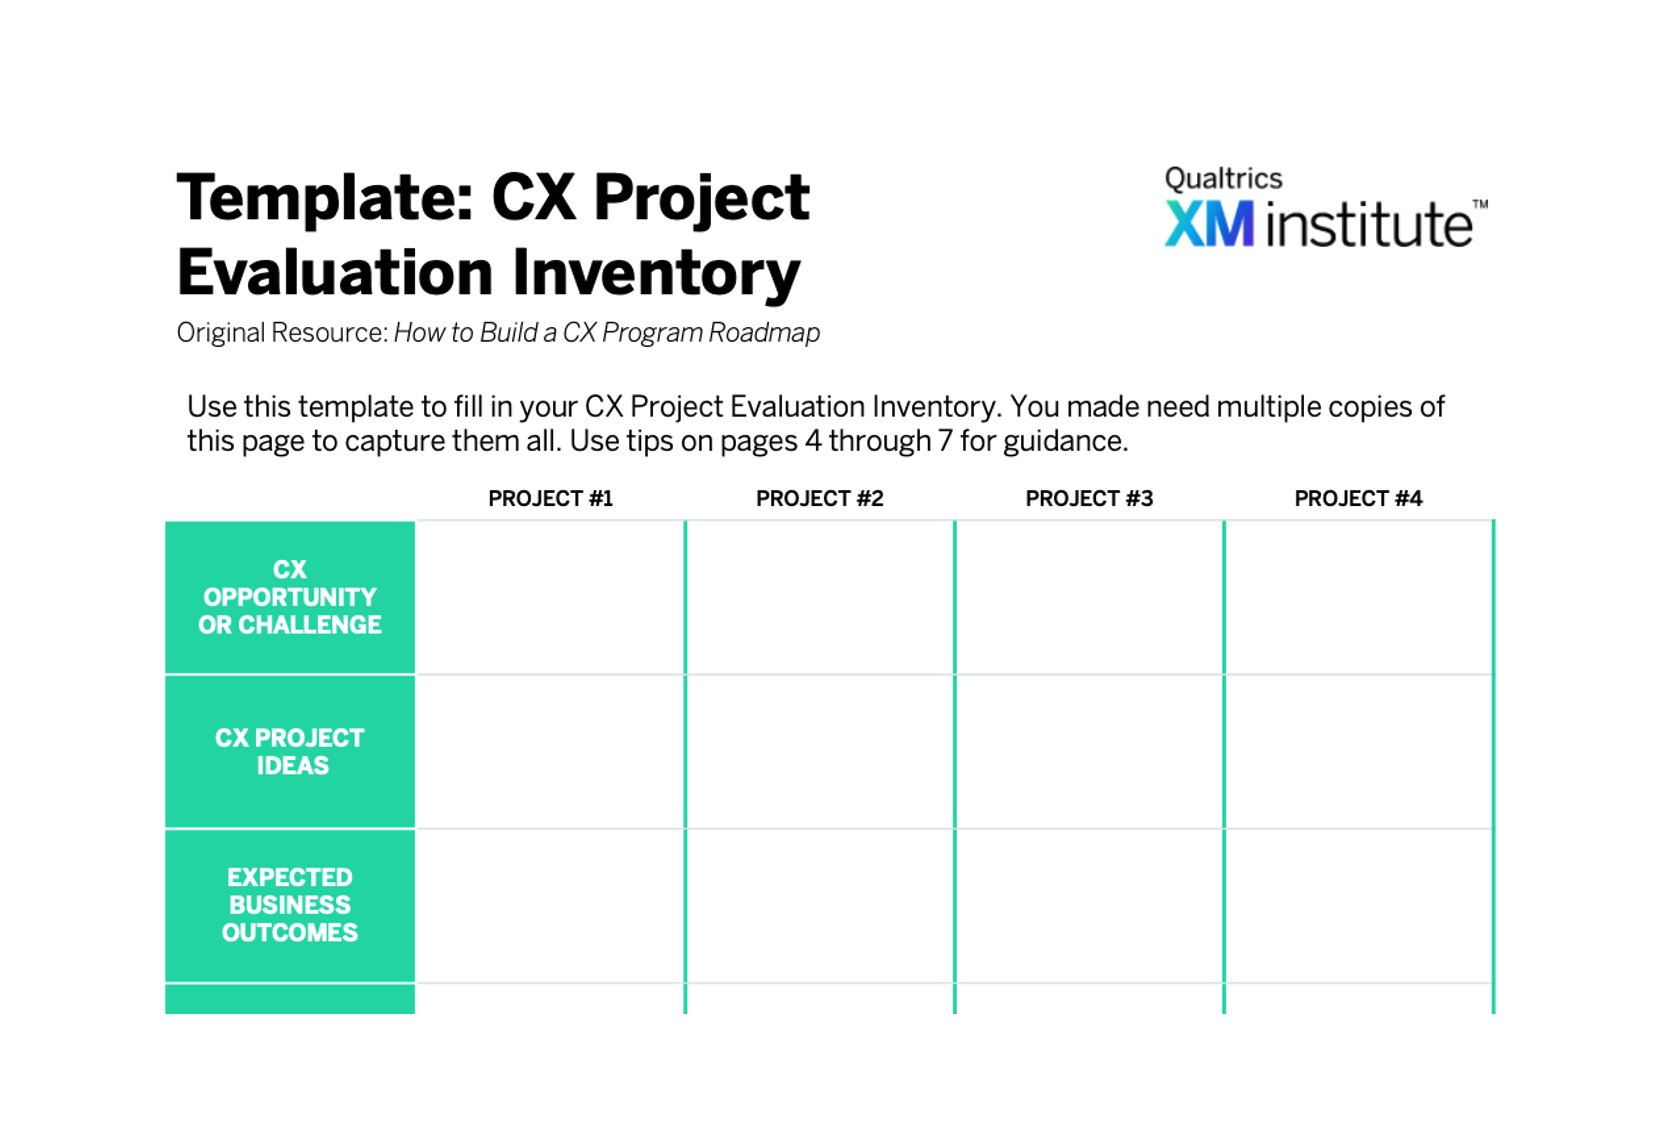 Template: CX Project Evaluation Inventory